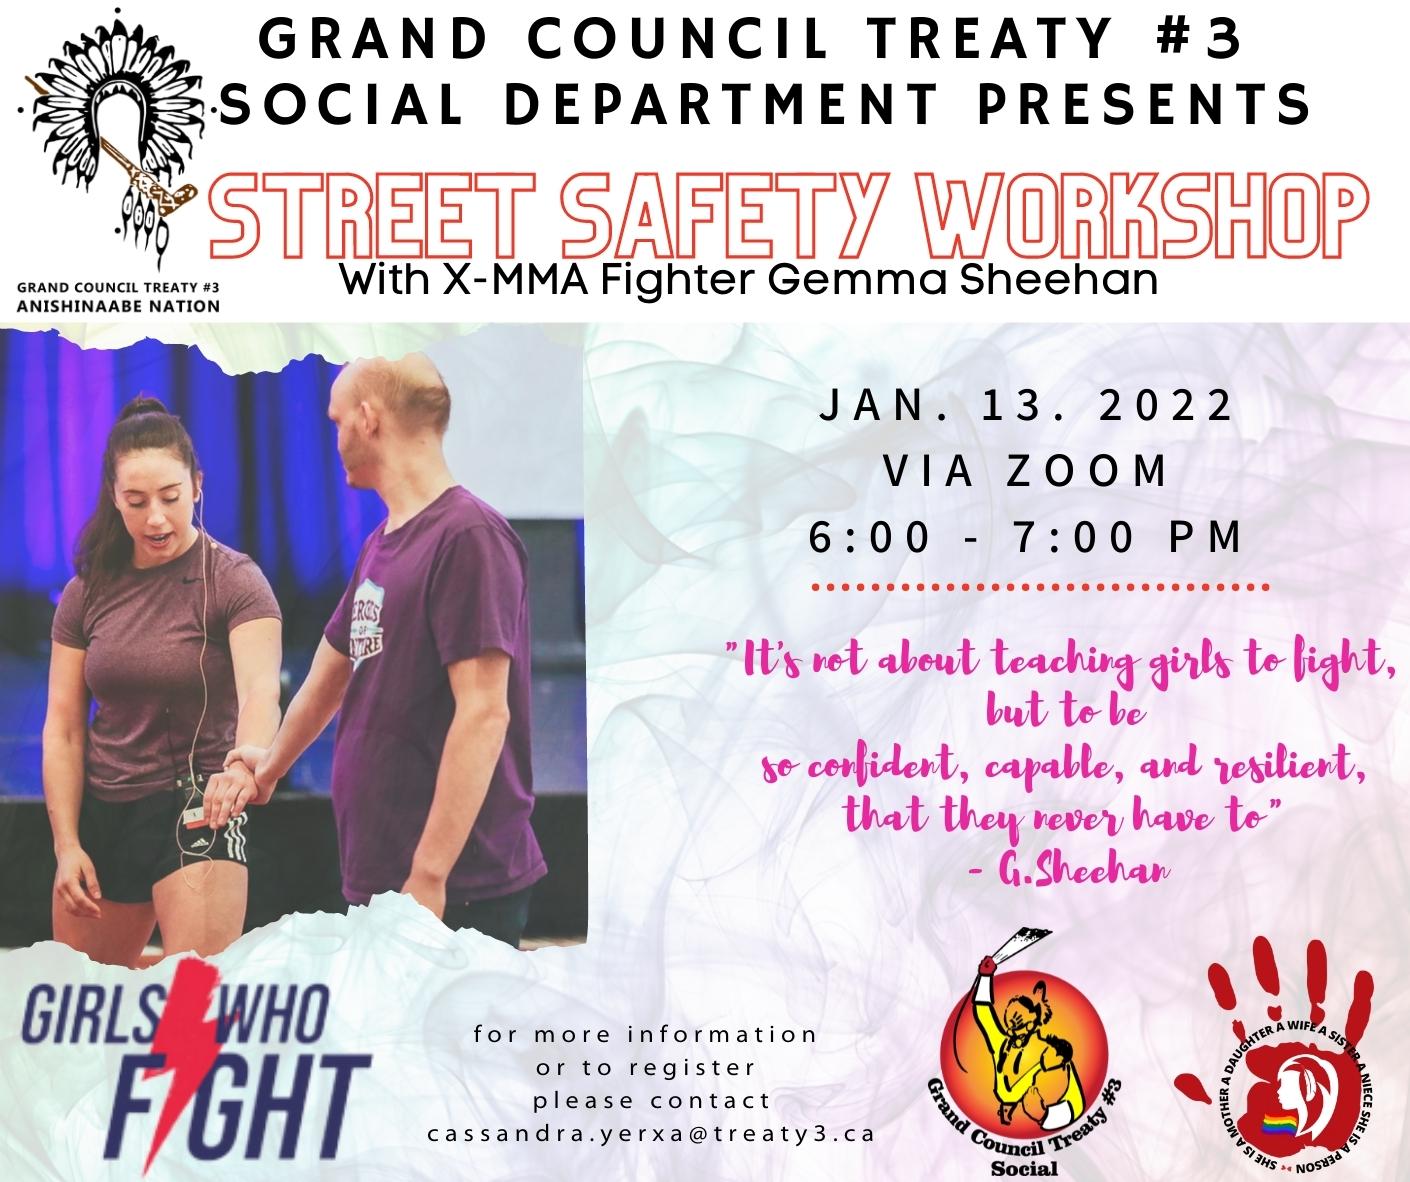 Street Safety Workshop with X-MMA Fighter Gemma Sheehan